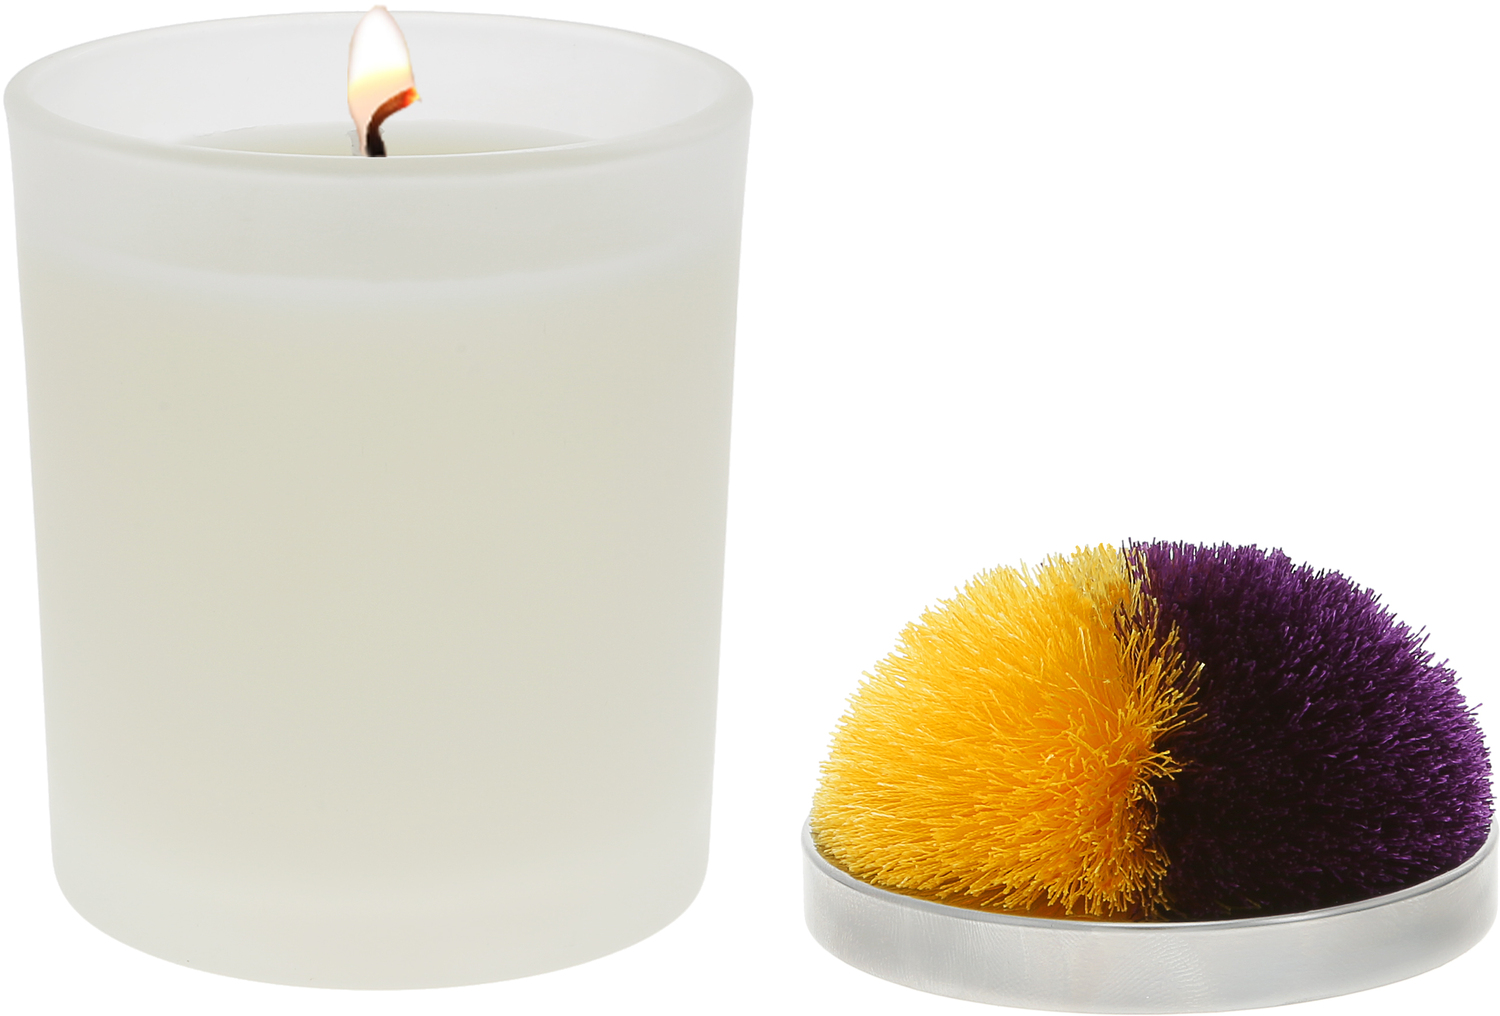 Blank - Purple & Yellow by Repre-Scent - Blank - Purple & Yellow - 5.5 oz - 100% Soy Wax Candle with Pom Pom Lid
Scent: Tranquility